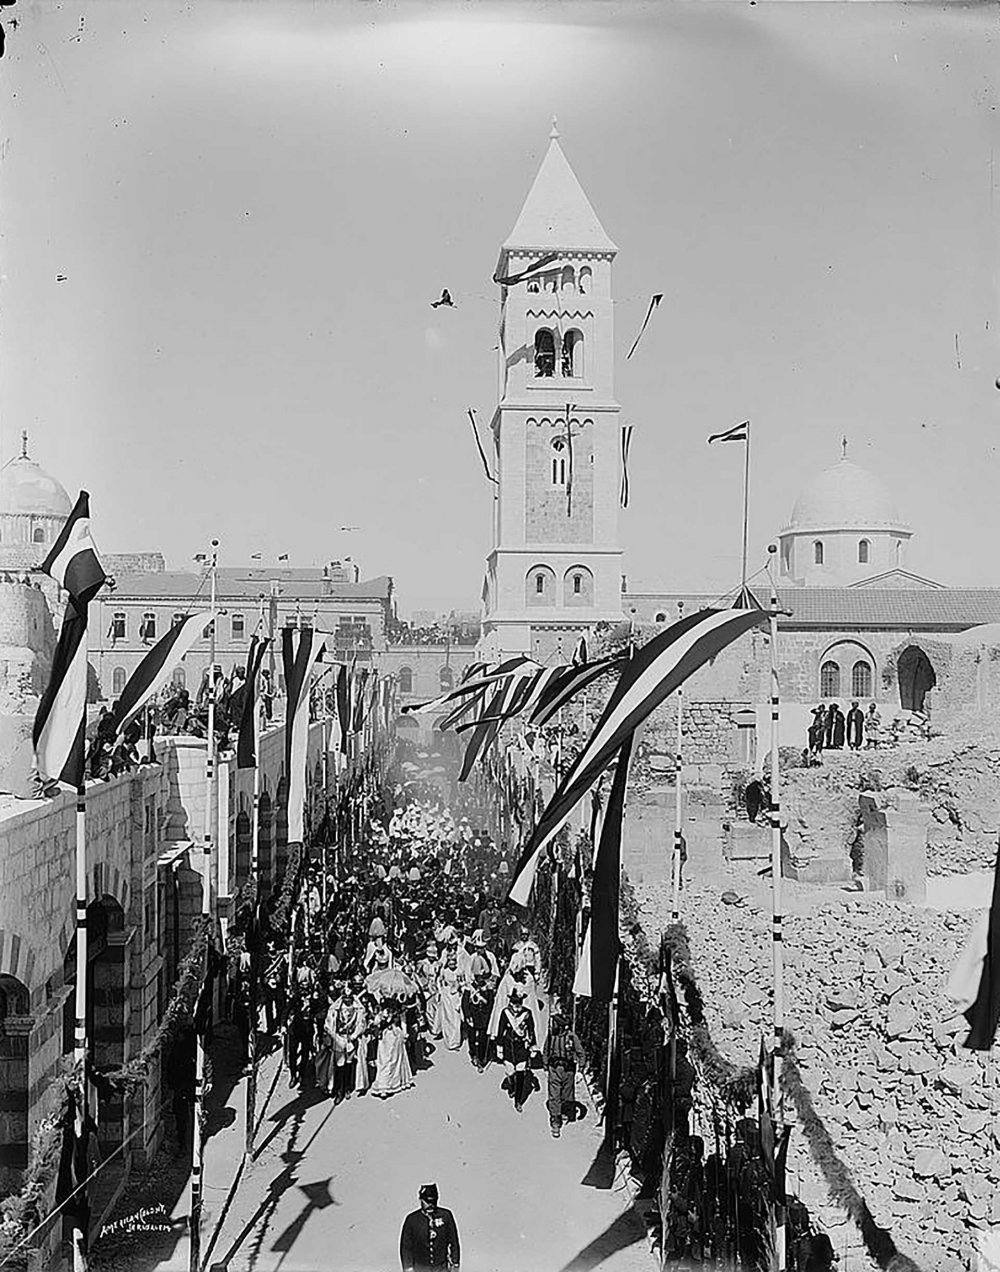 Emperor (Kaiser) Wilhelm II of Germany, his wife, and cortege on a state visit to Jerusalem, October 31, 1898